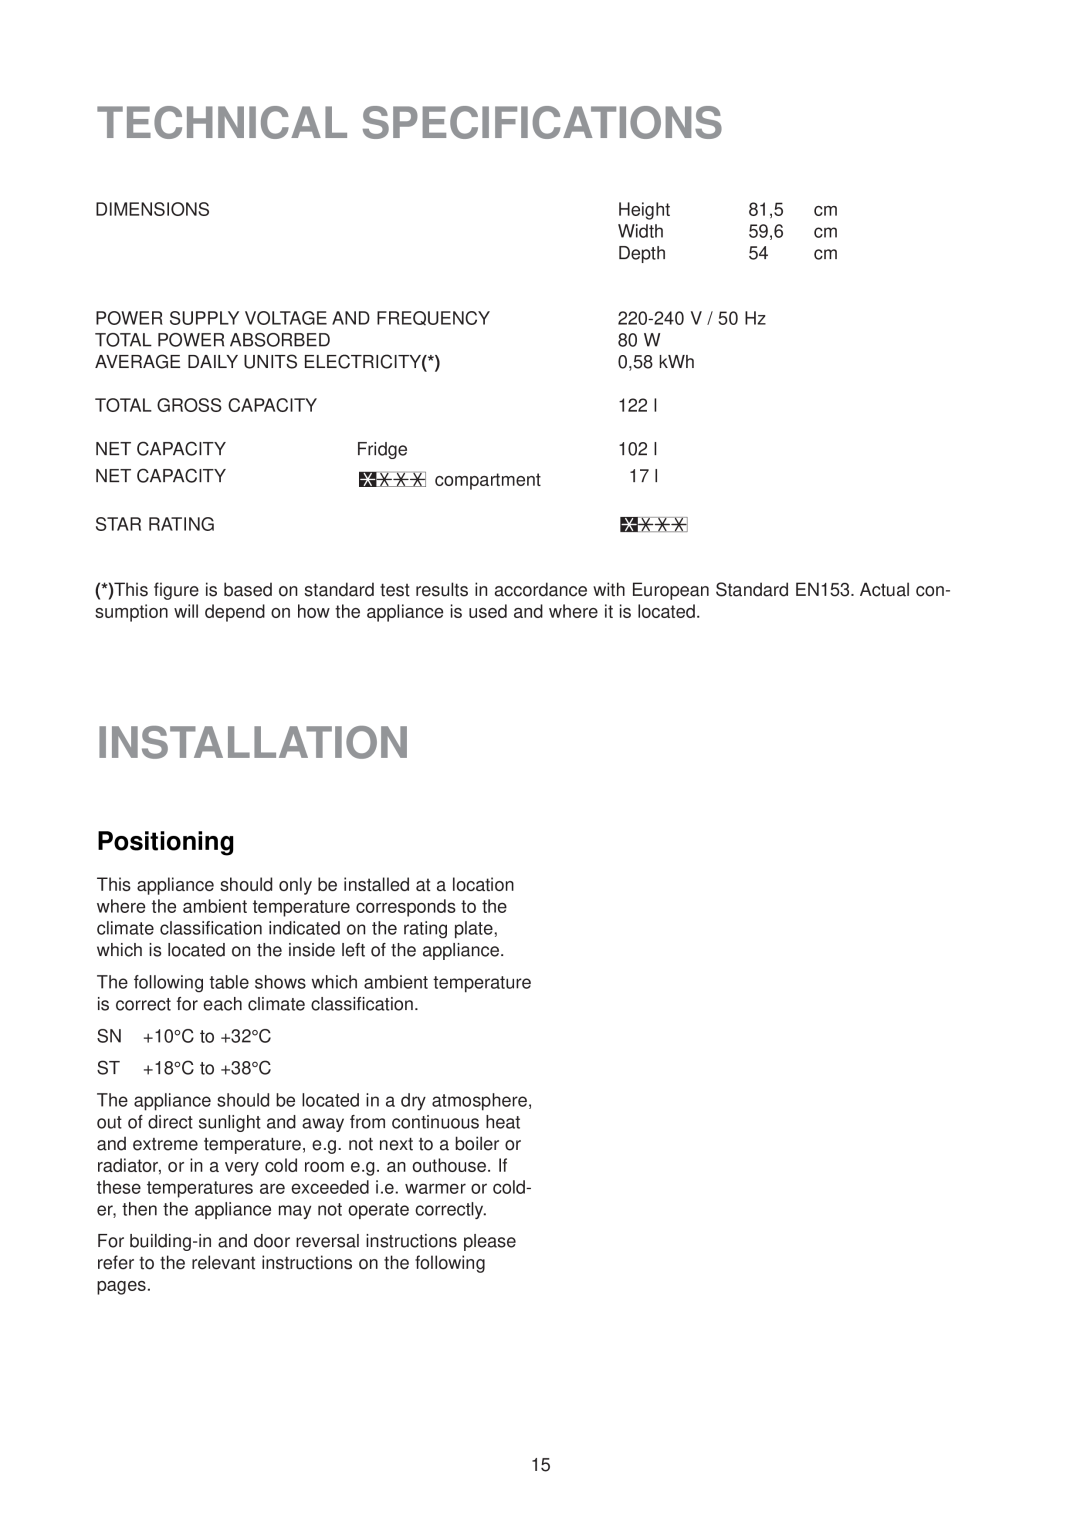 Zanussi ZUD 9124 manual Technical Specifications, Installation, Positioning 